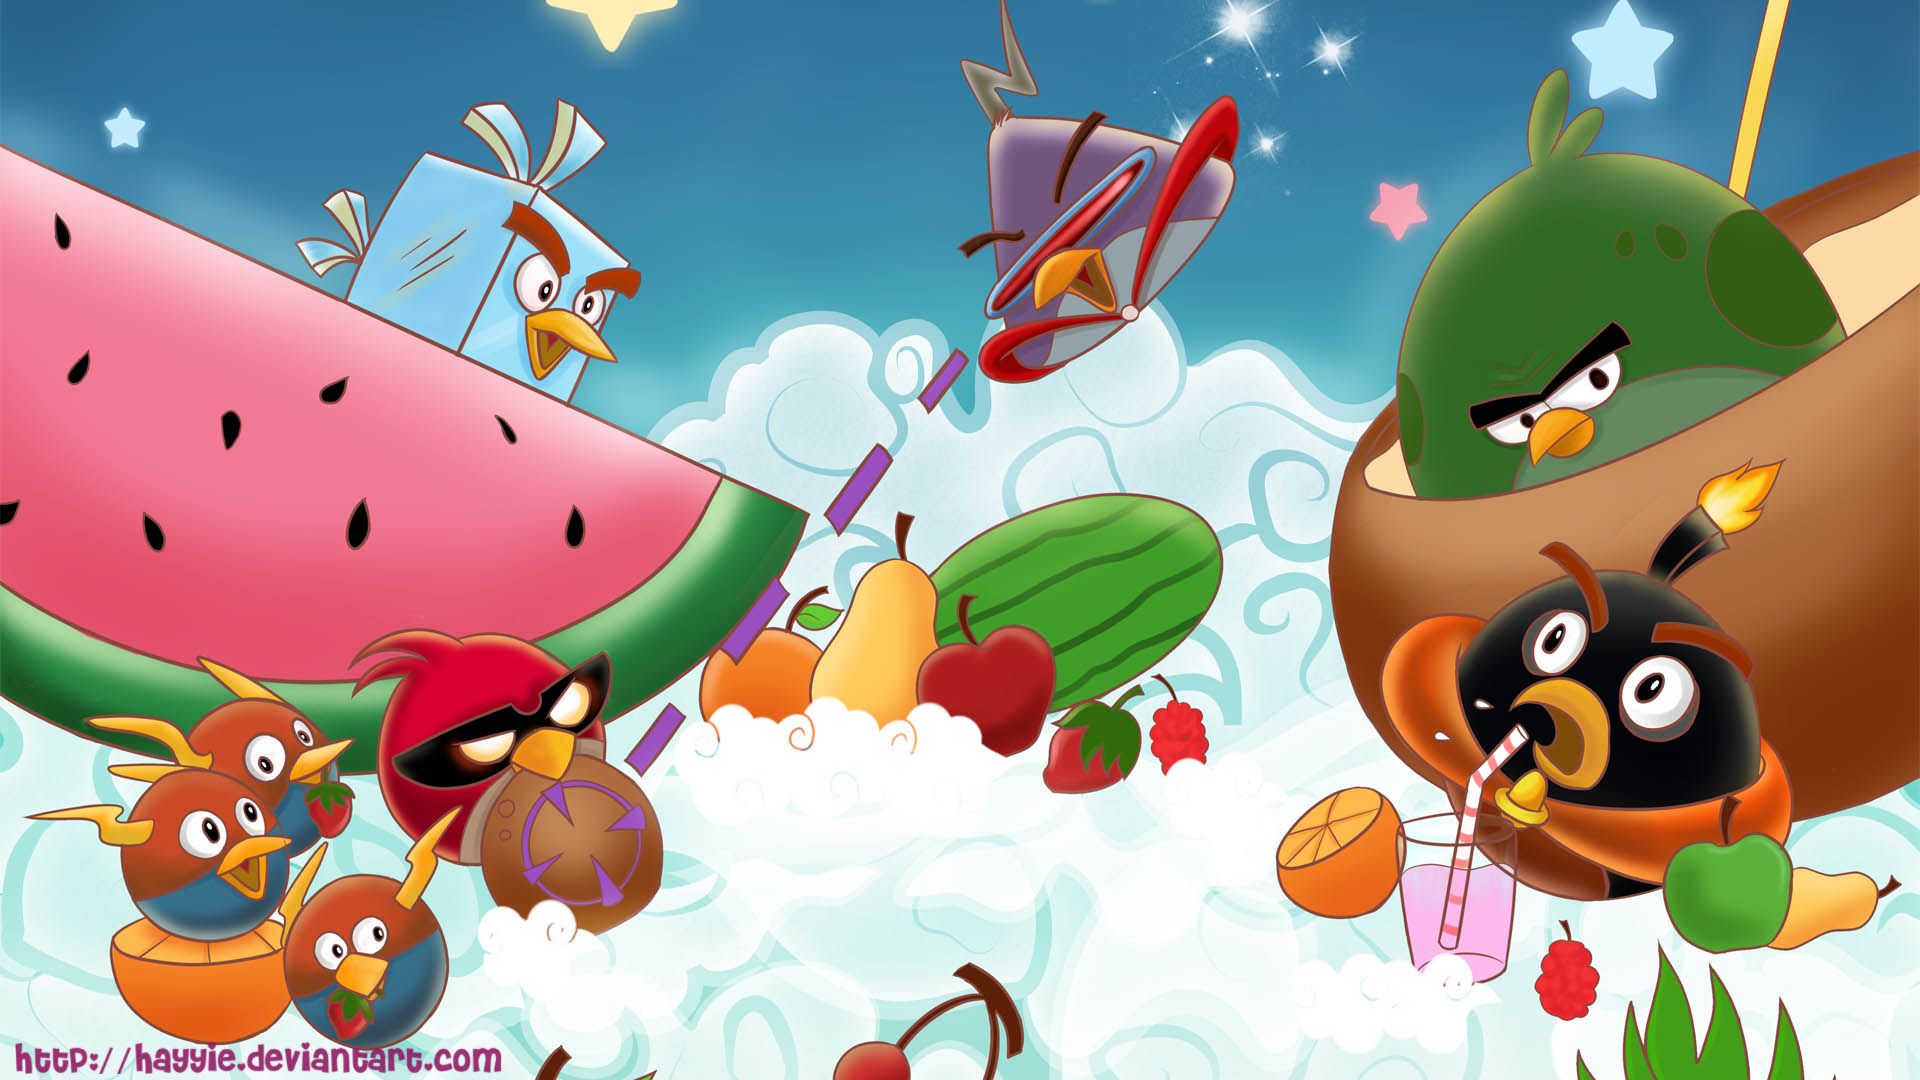 Angry Birds! - Pictures Collection Free Download - Mobogenie.com